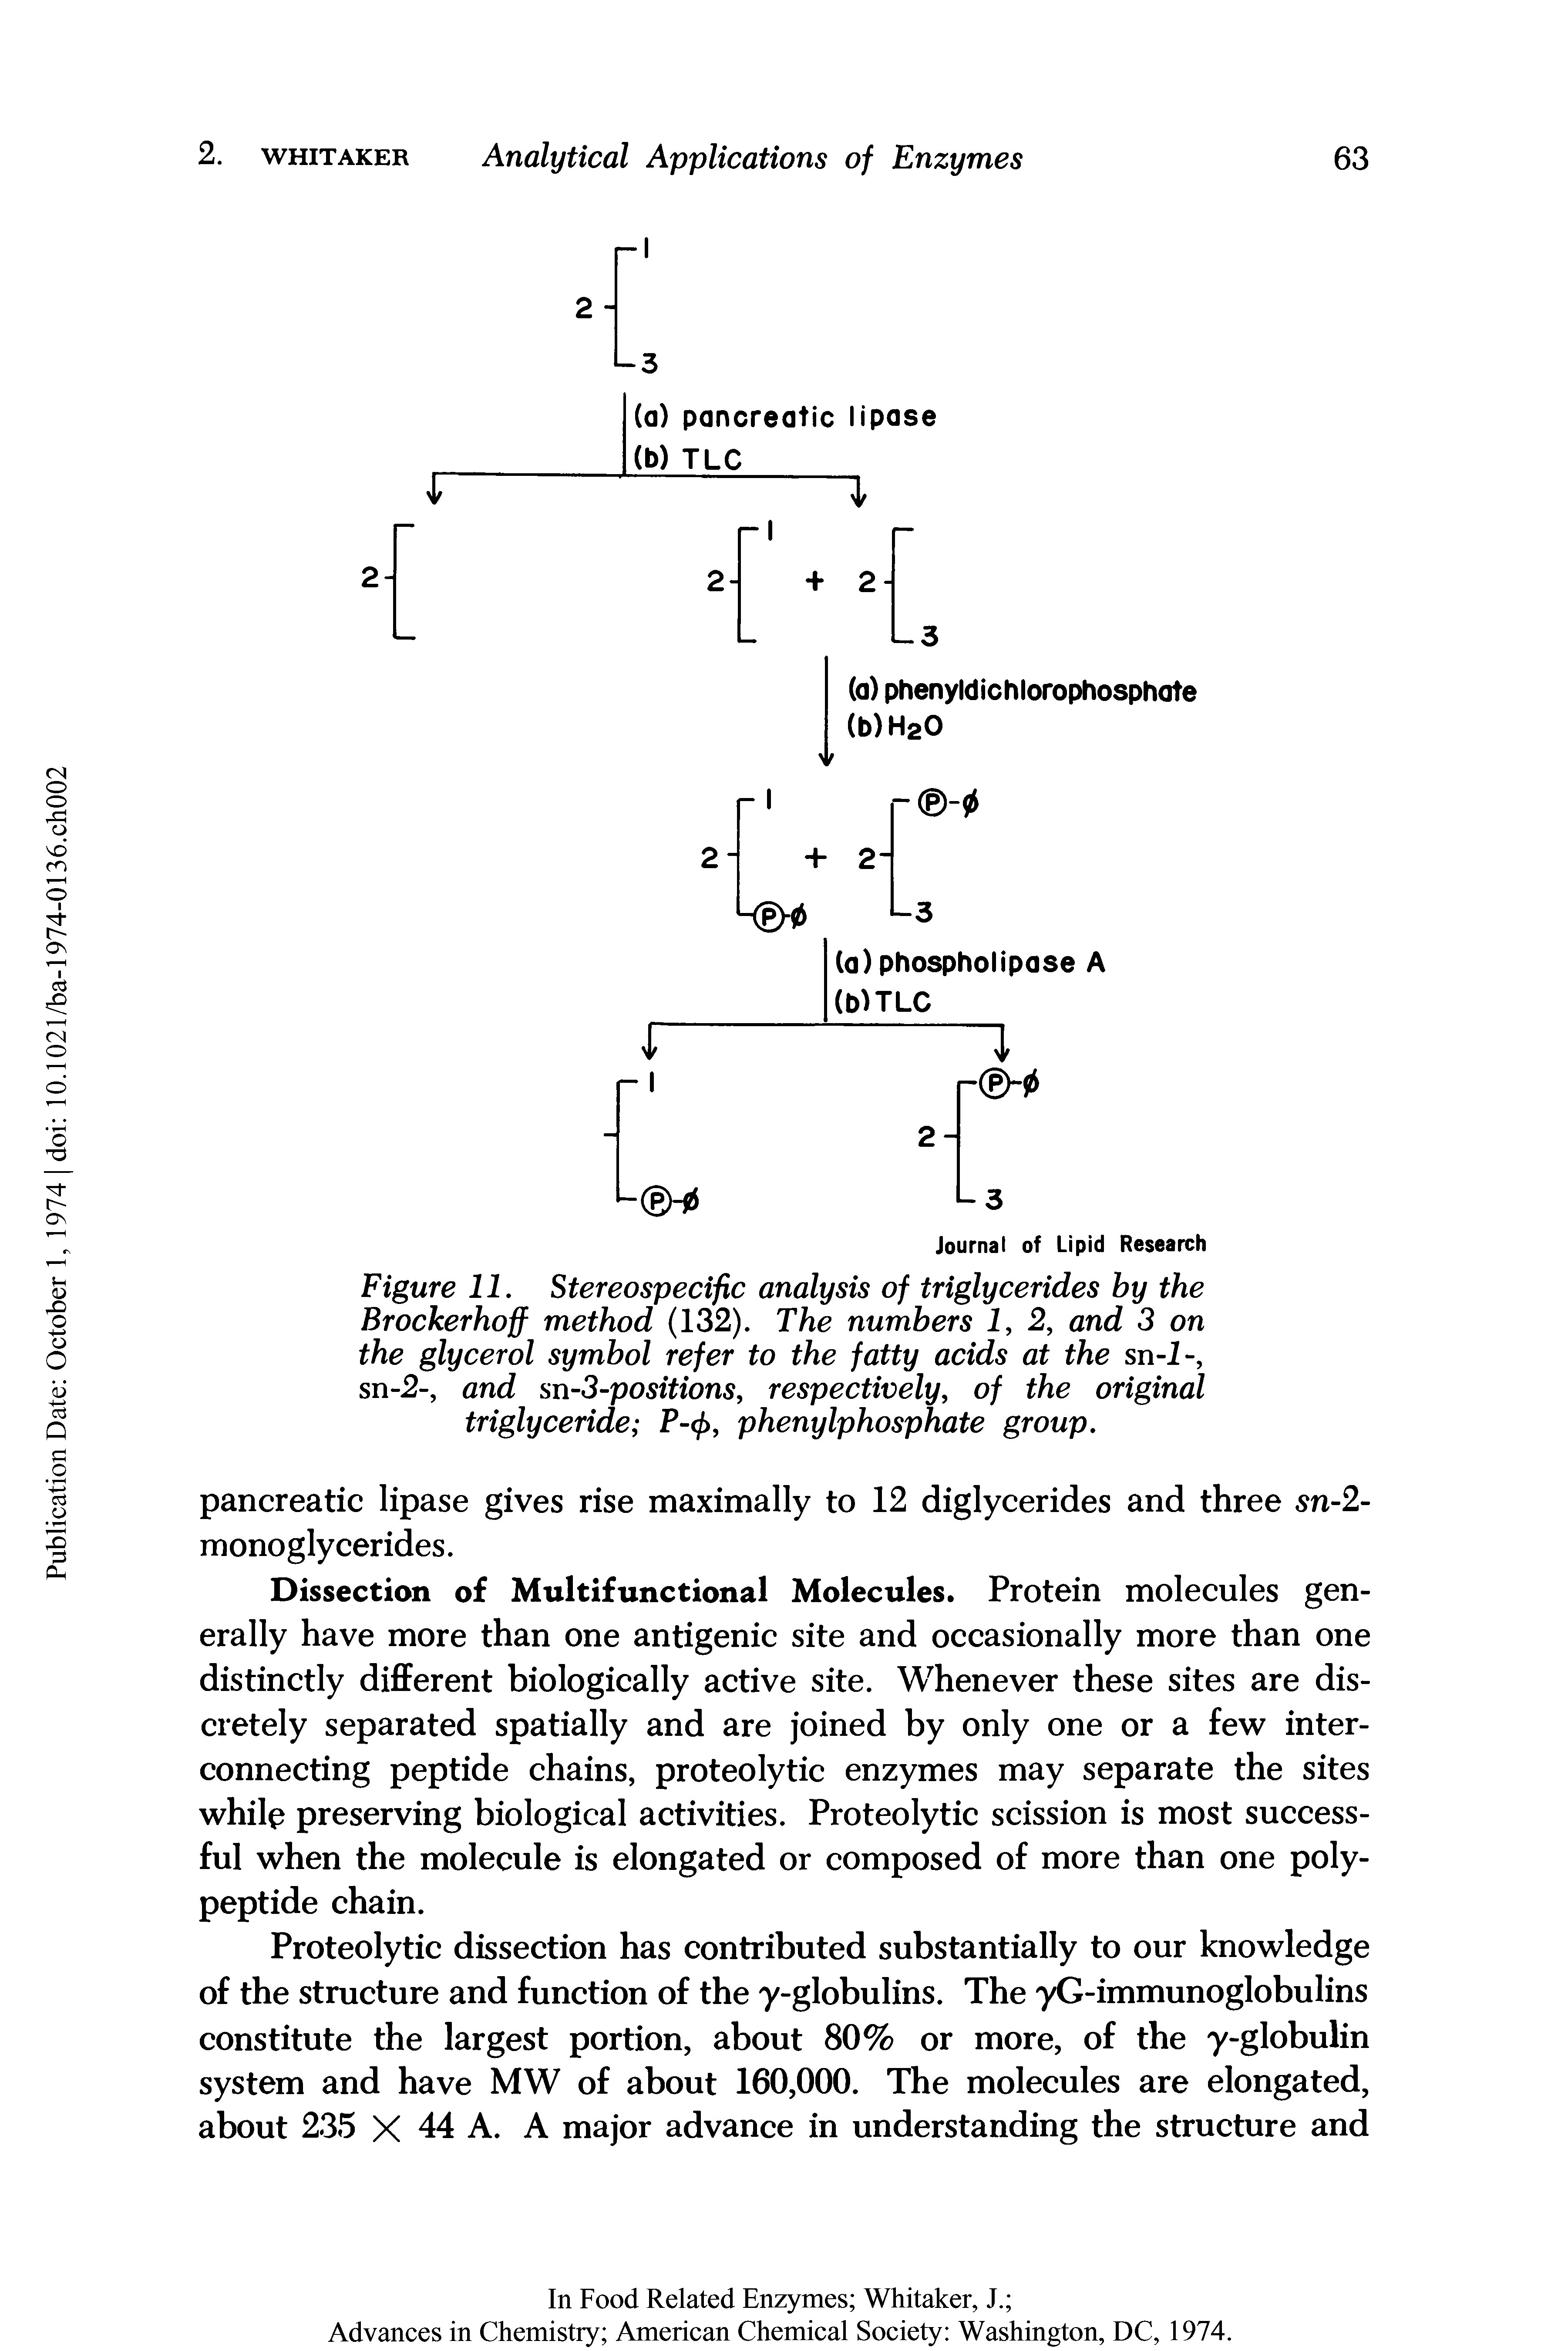 Figure 11. Stereospecific analysis of triglycerides by the Brockerhoff method (132). The numbers 1, 2, and 3 on the glycerol symbol refer to the fatty acids at the sn-I-, sn-2-, and sn-3-positions, respectively, of the original triglyceride phenylphosphate group.